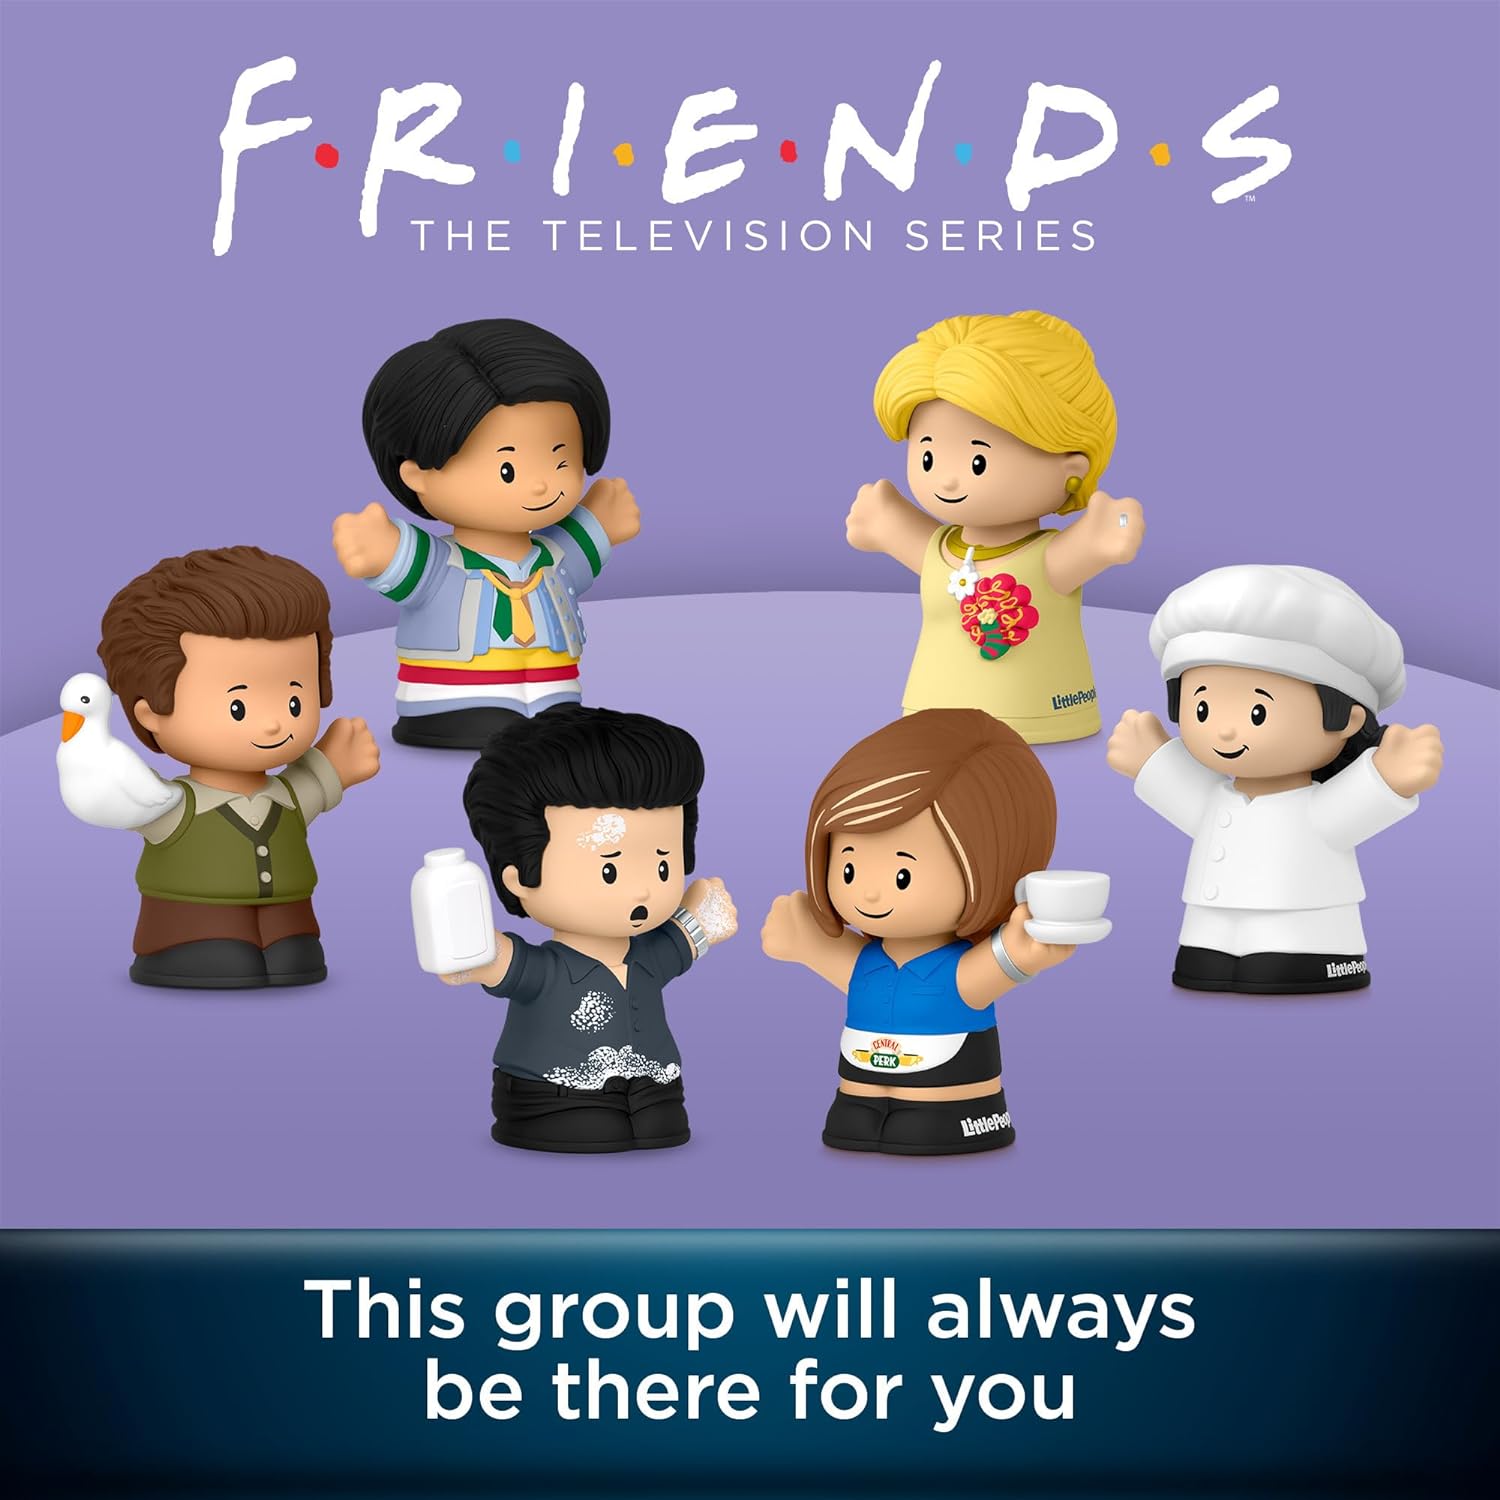 Little People Collector Friends TV Series Special Edition Figure Set for Adults & Fans, 6 Characters in a Display Gift Package